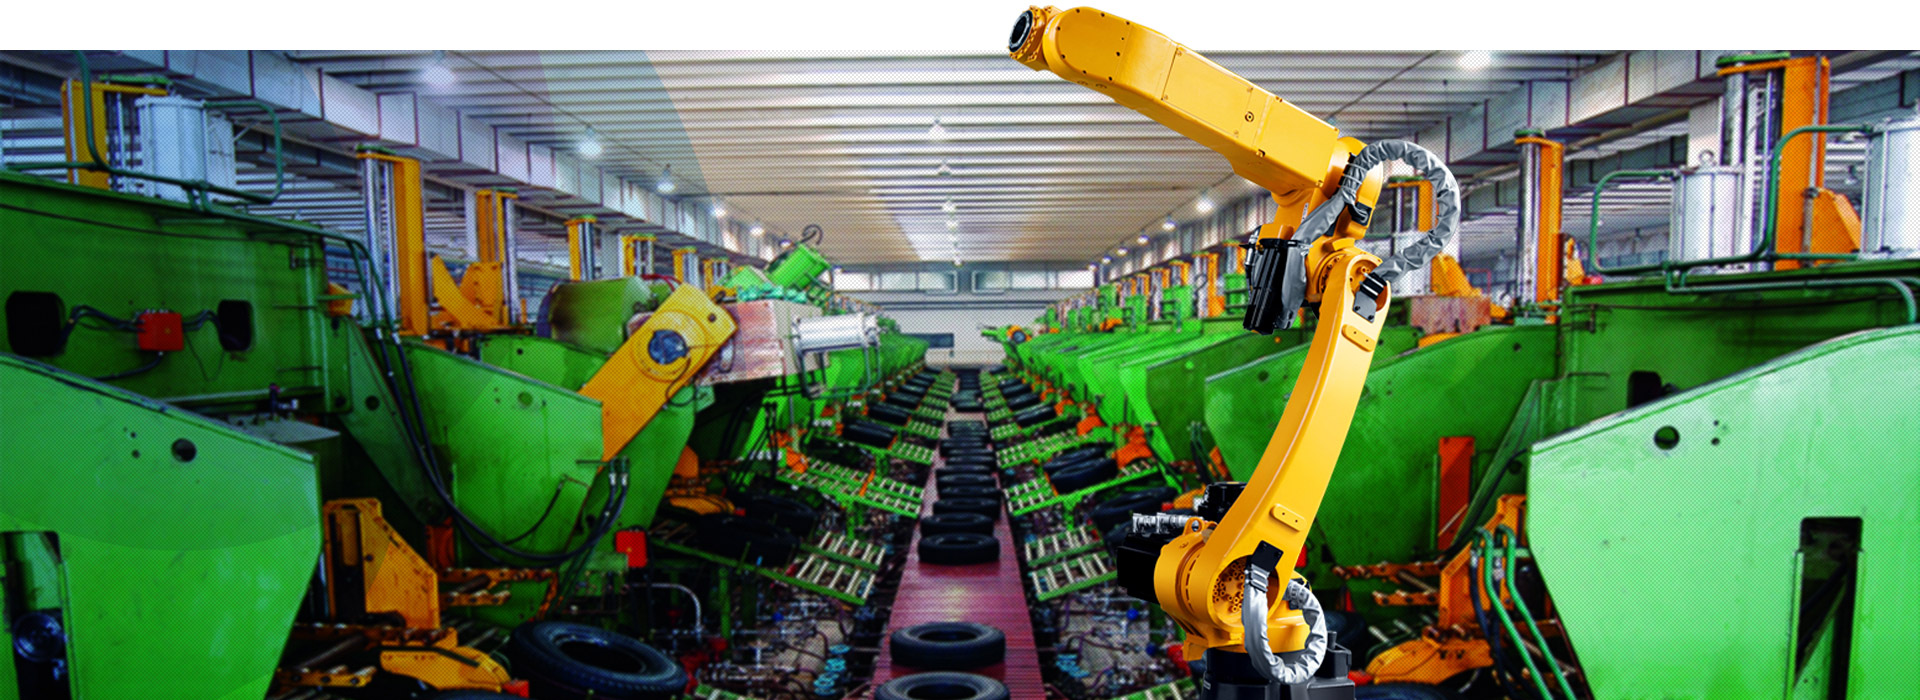 Rubber machinery industry